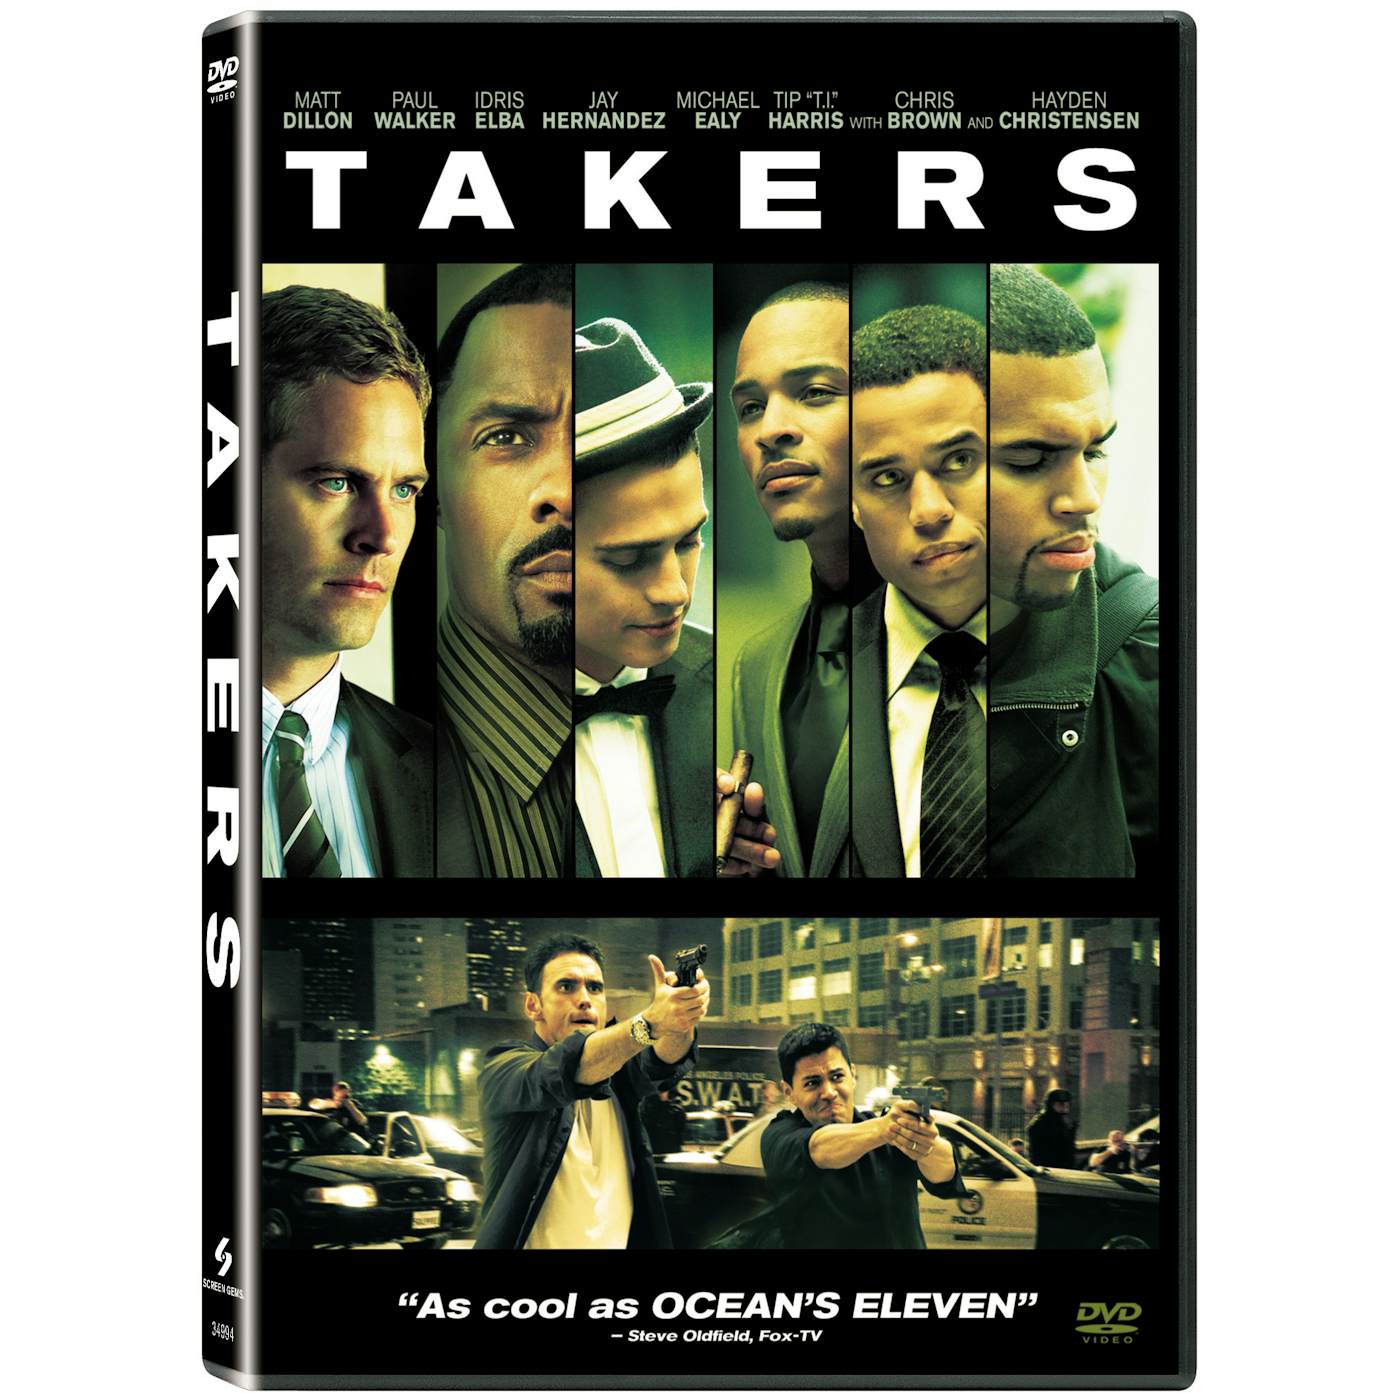 TAKERS DVD